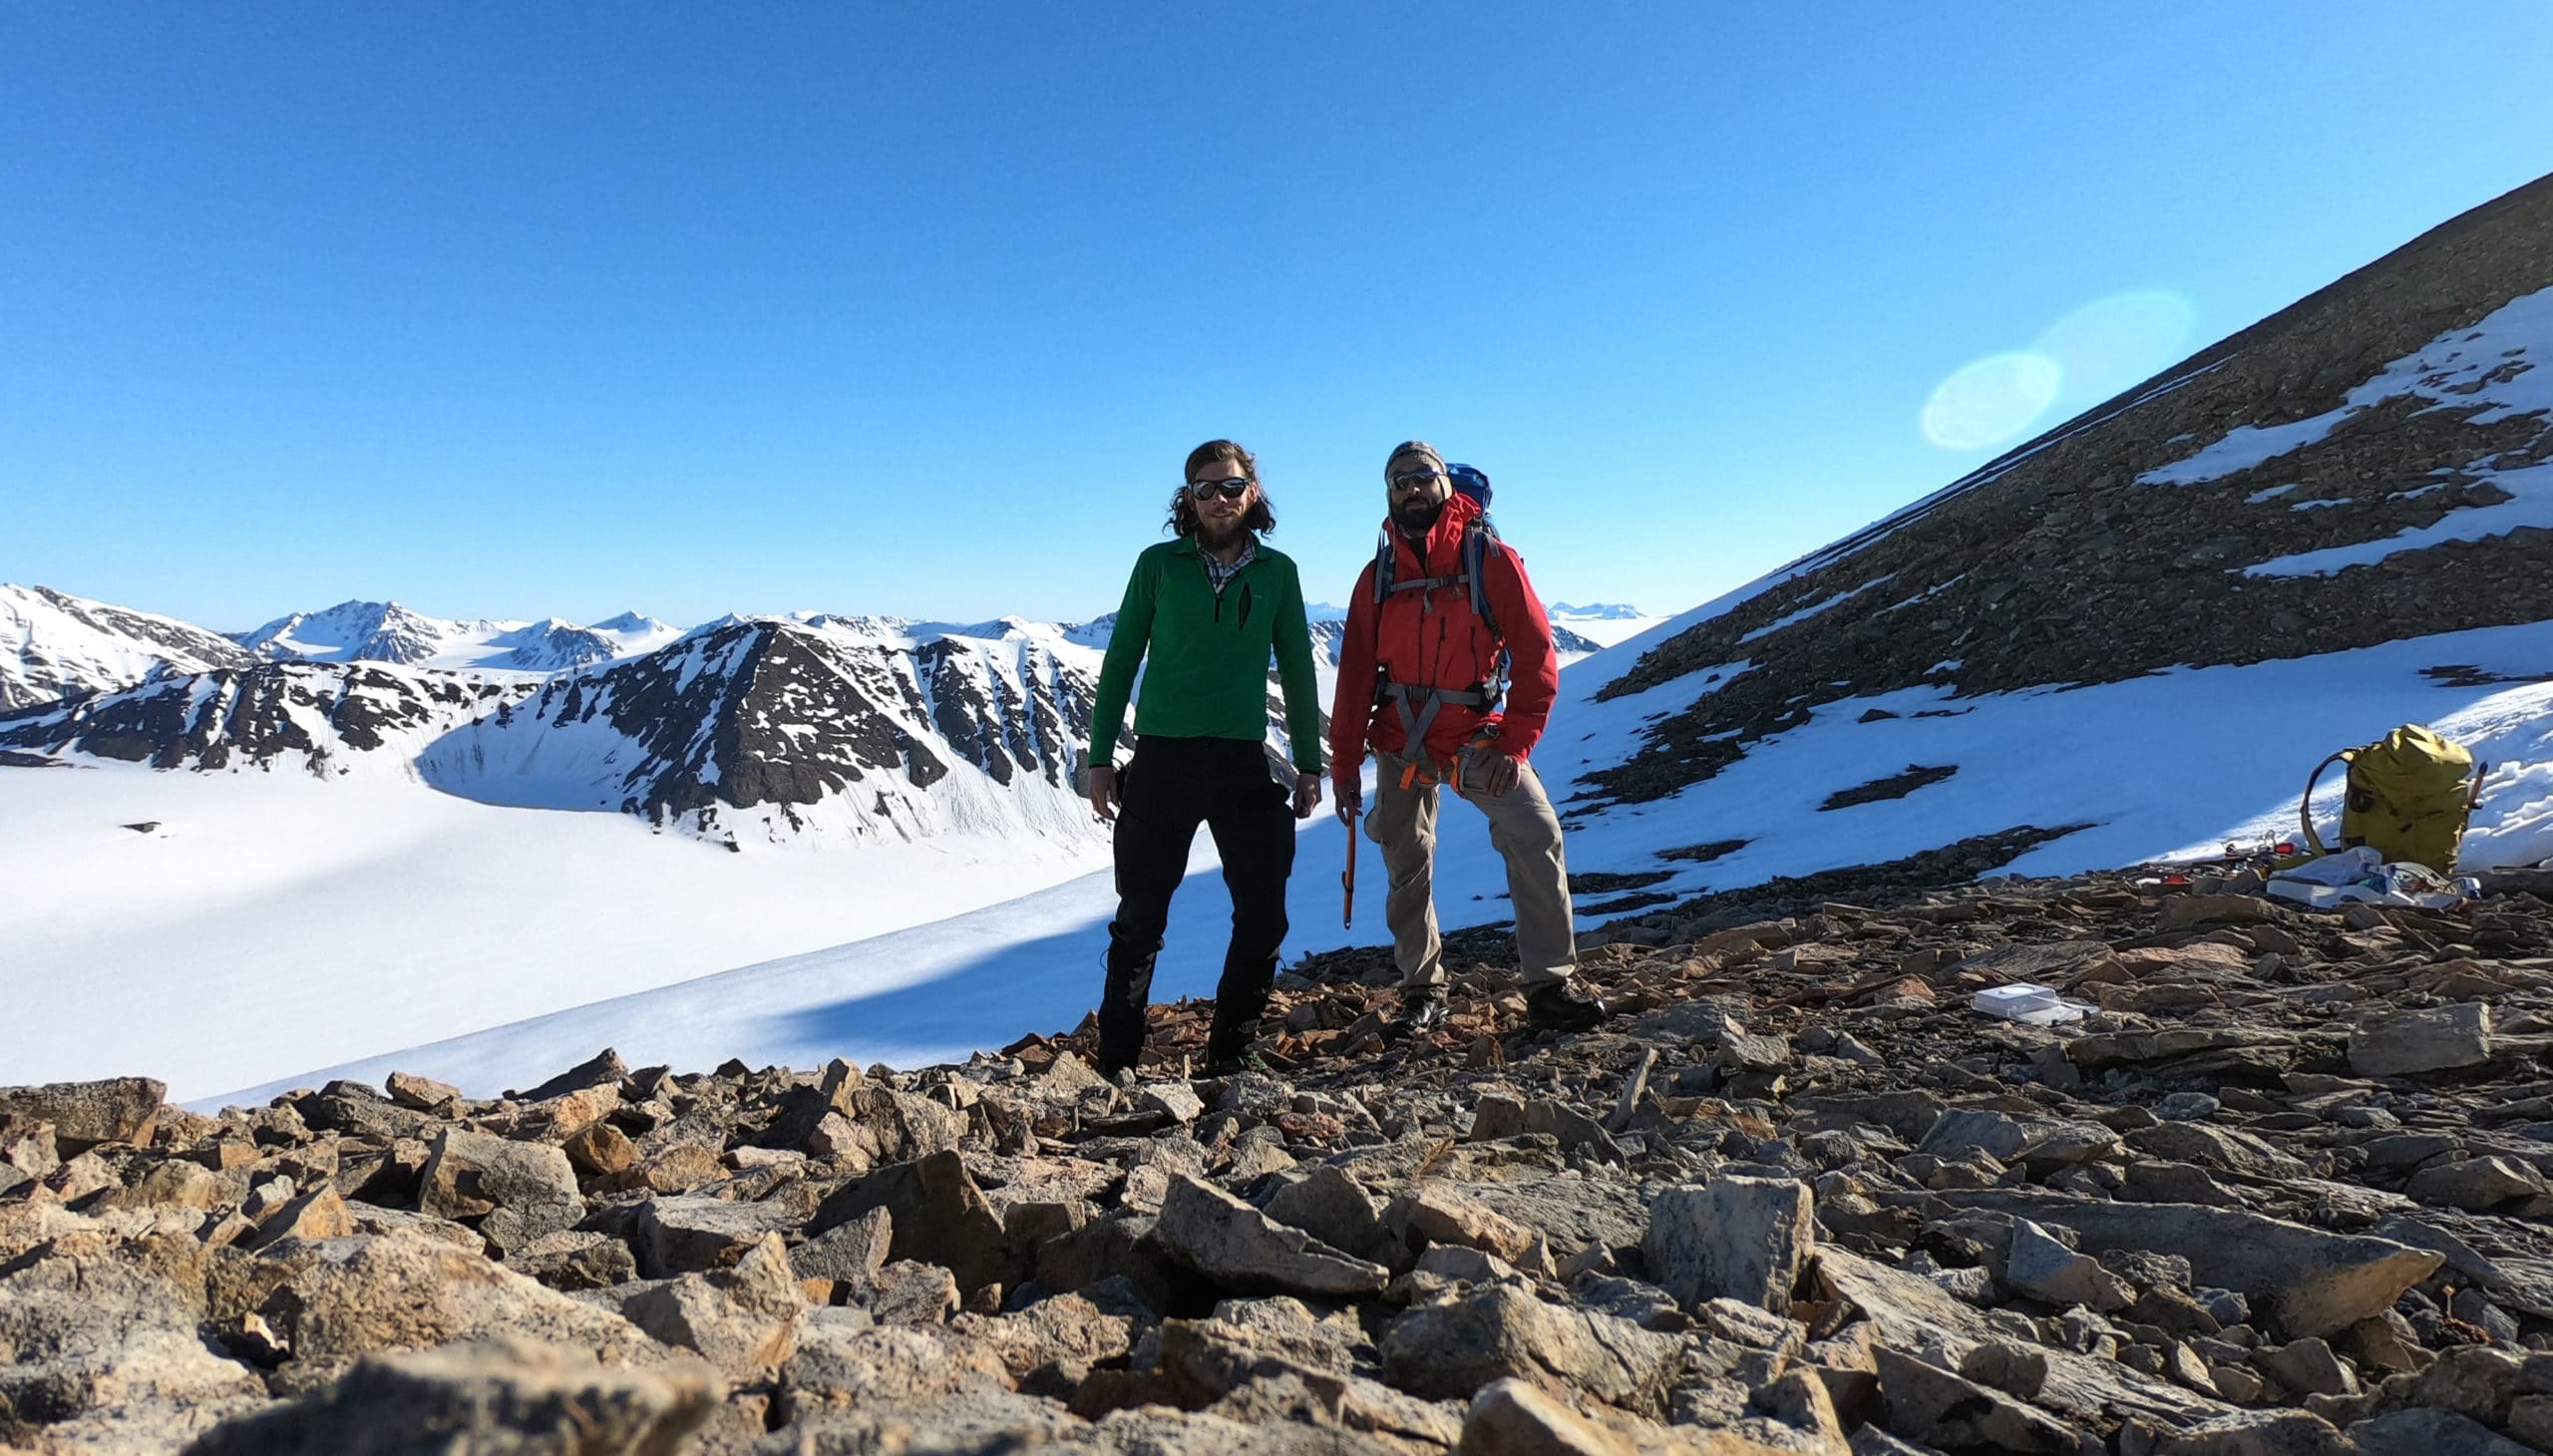 Two mountaineers - Max Kortmann and Sebastian Pohl - in colorful winter gear with snowy mountains in the back